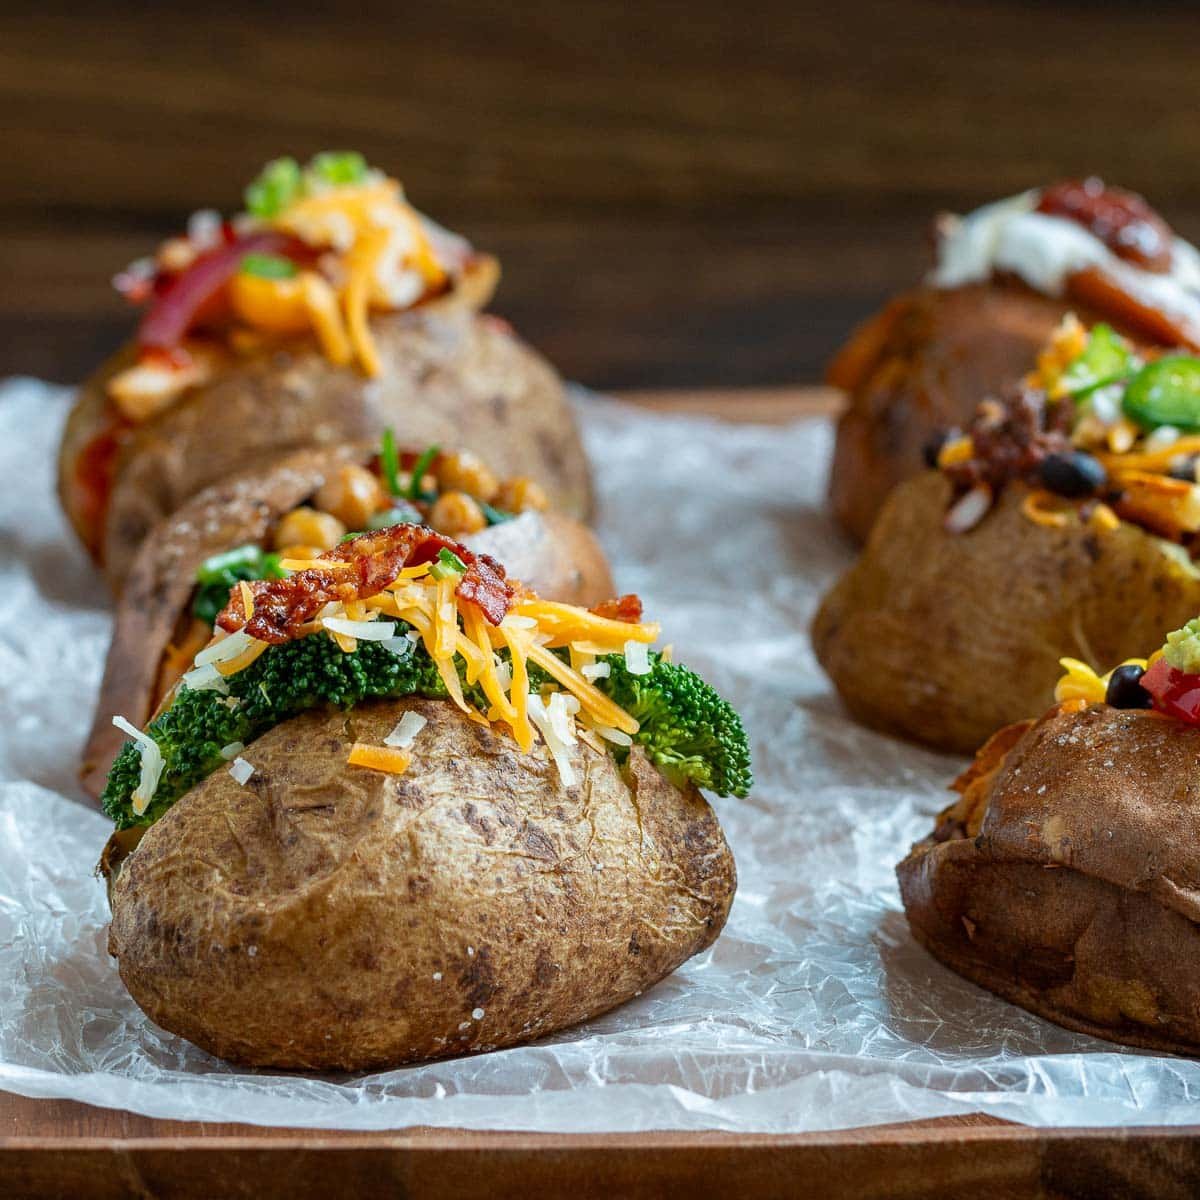 Broccoli and cheese baked potato topped with crumbly bacon. 